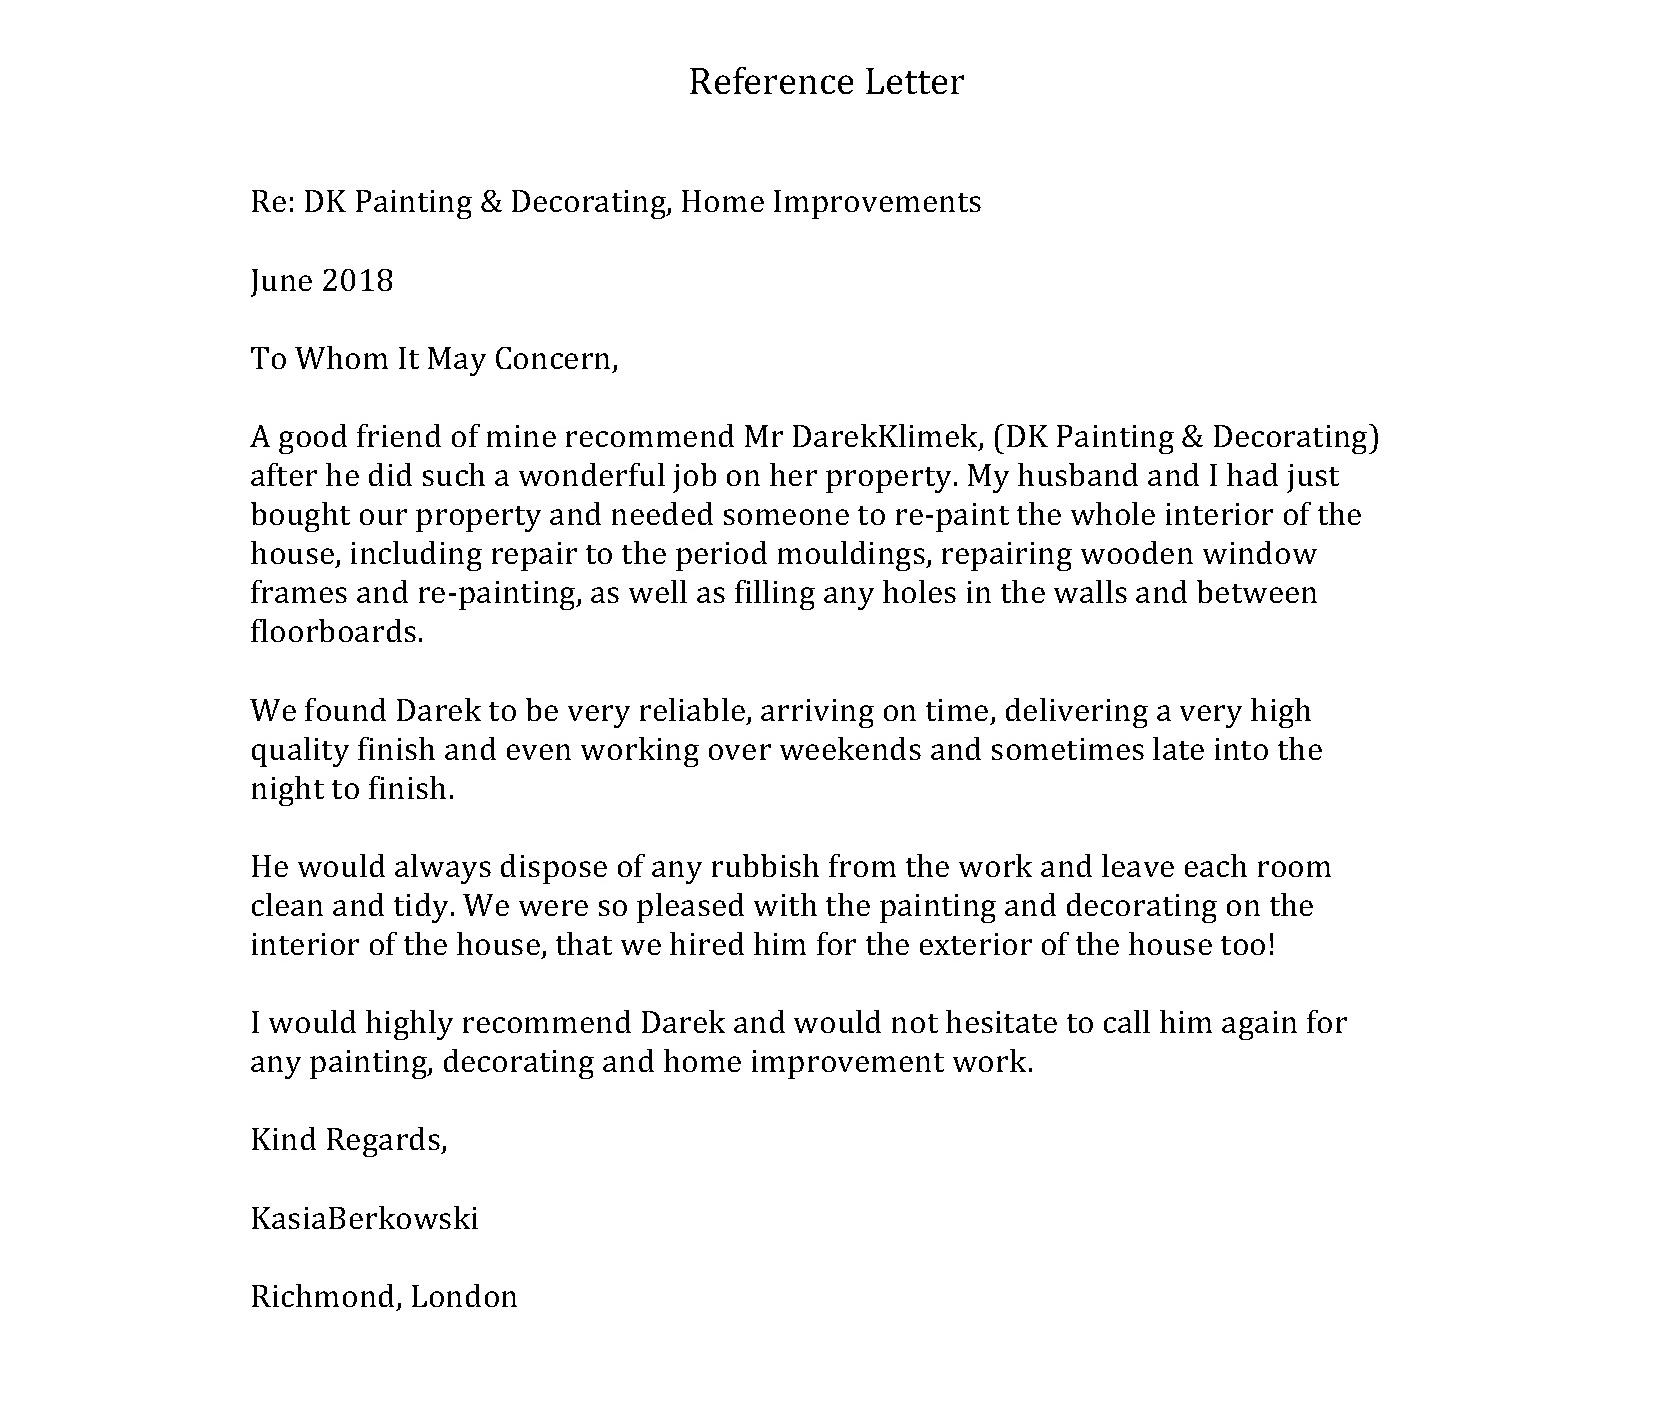 Reference Letter From Kasiaberkowski for size 1654 X 1402